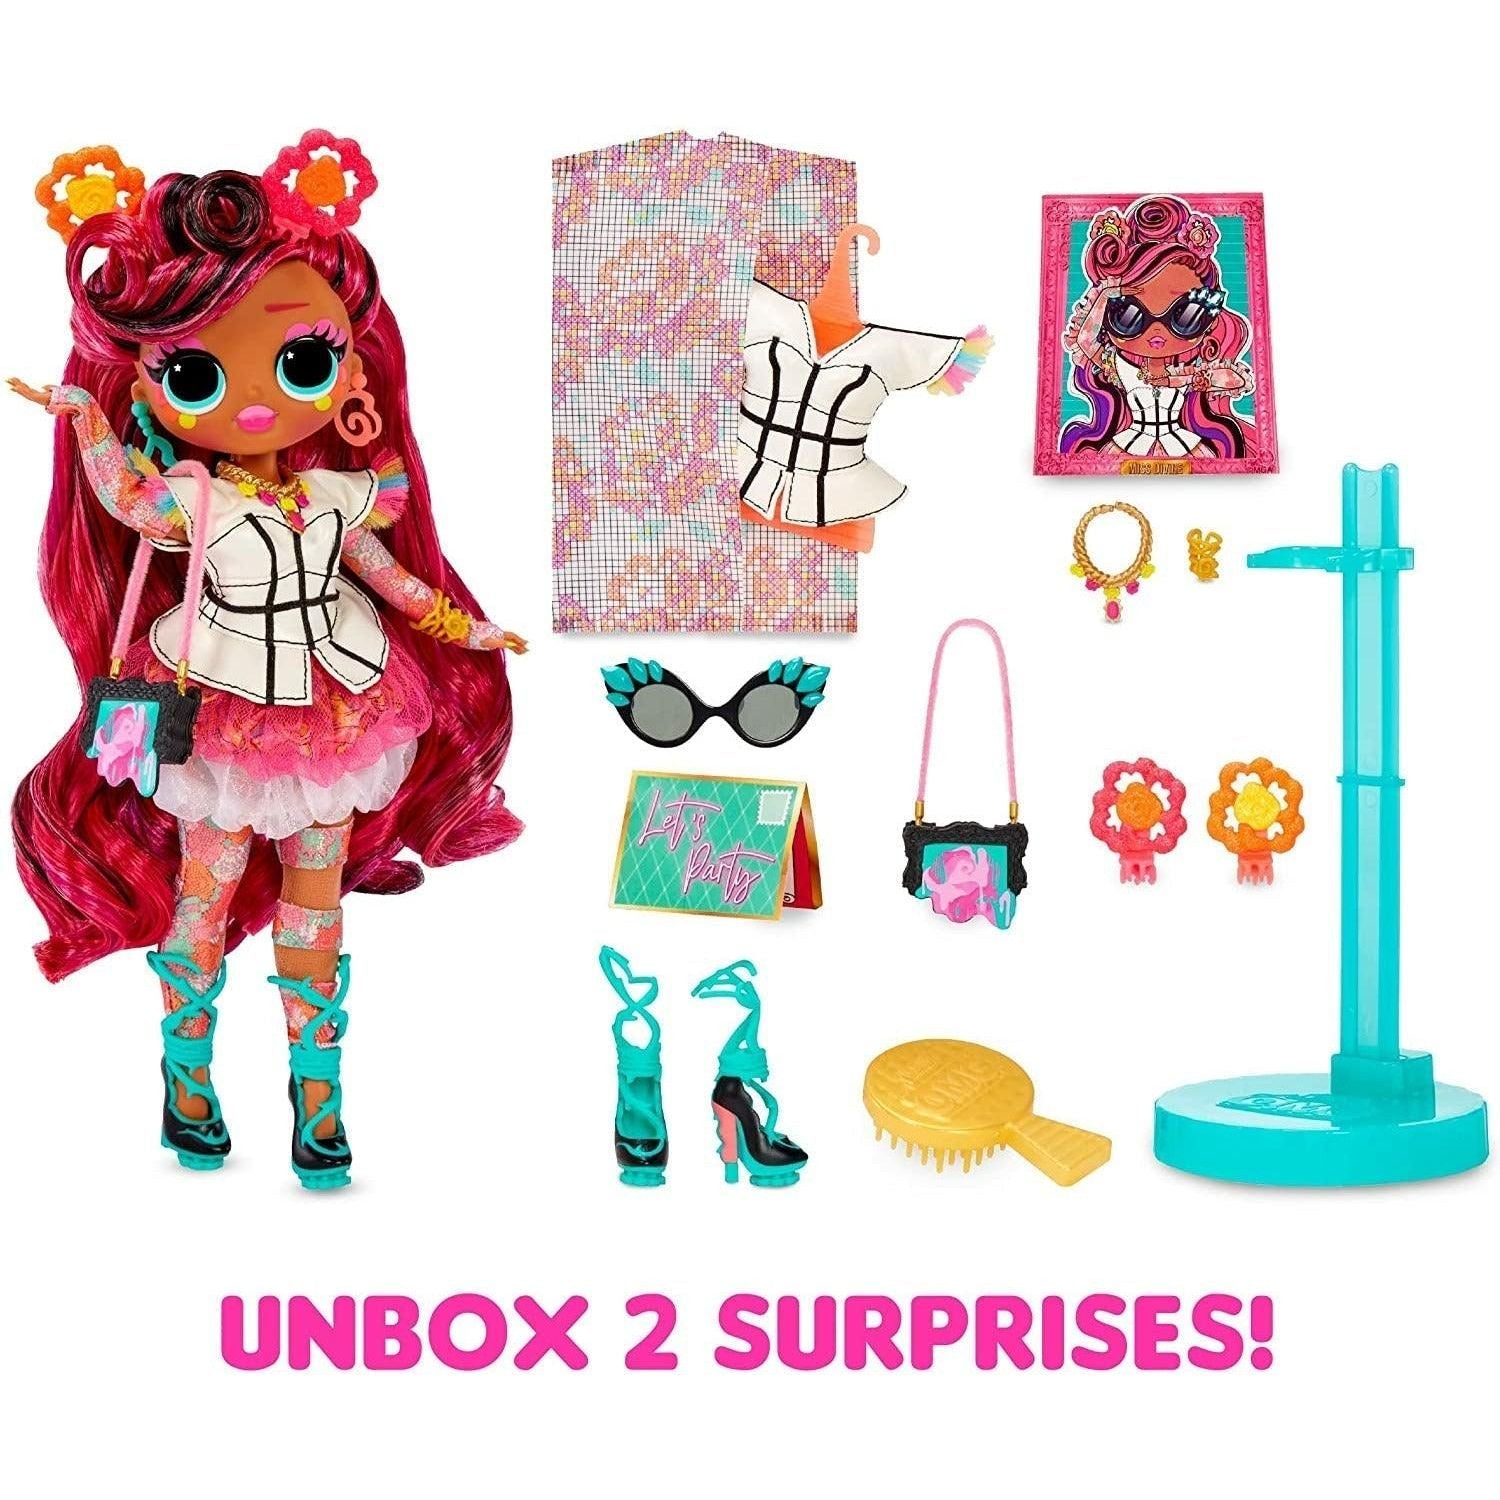 LOL Surprise OMG Queens Miss Divine Fashion Doll with 20 Surprises Including Outfit and Accessories - BumbleToys - 5-7 Years, Dolls, Fashion Dolls & Accessories, Girls, L.O.L, OXE, Pre-Order